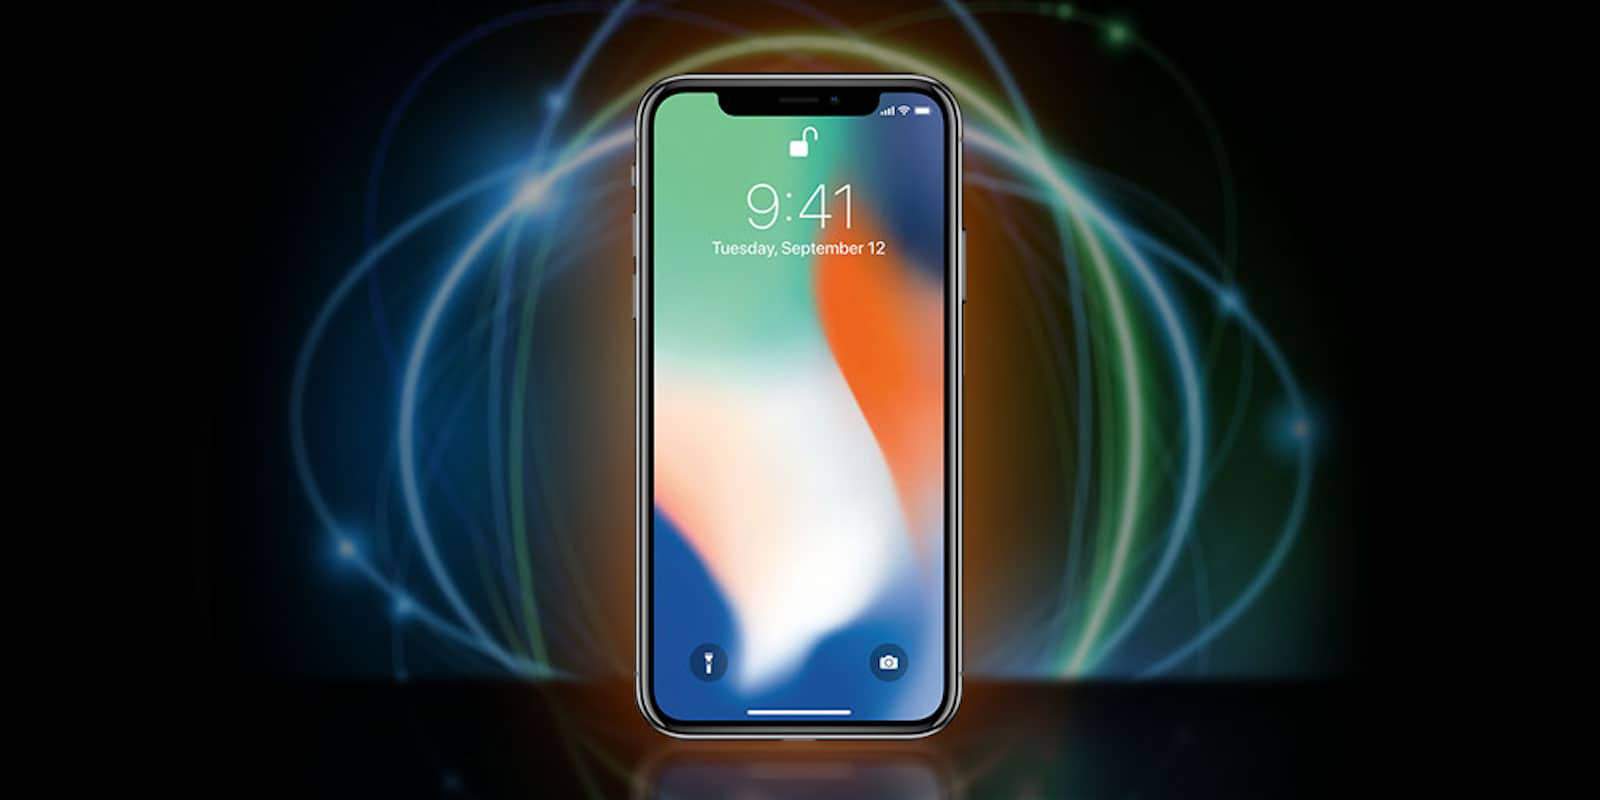 At long last, we can announce the winner of the Cult of Mac iPhone X Giveaway.